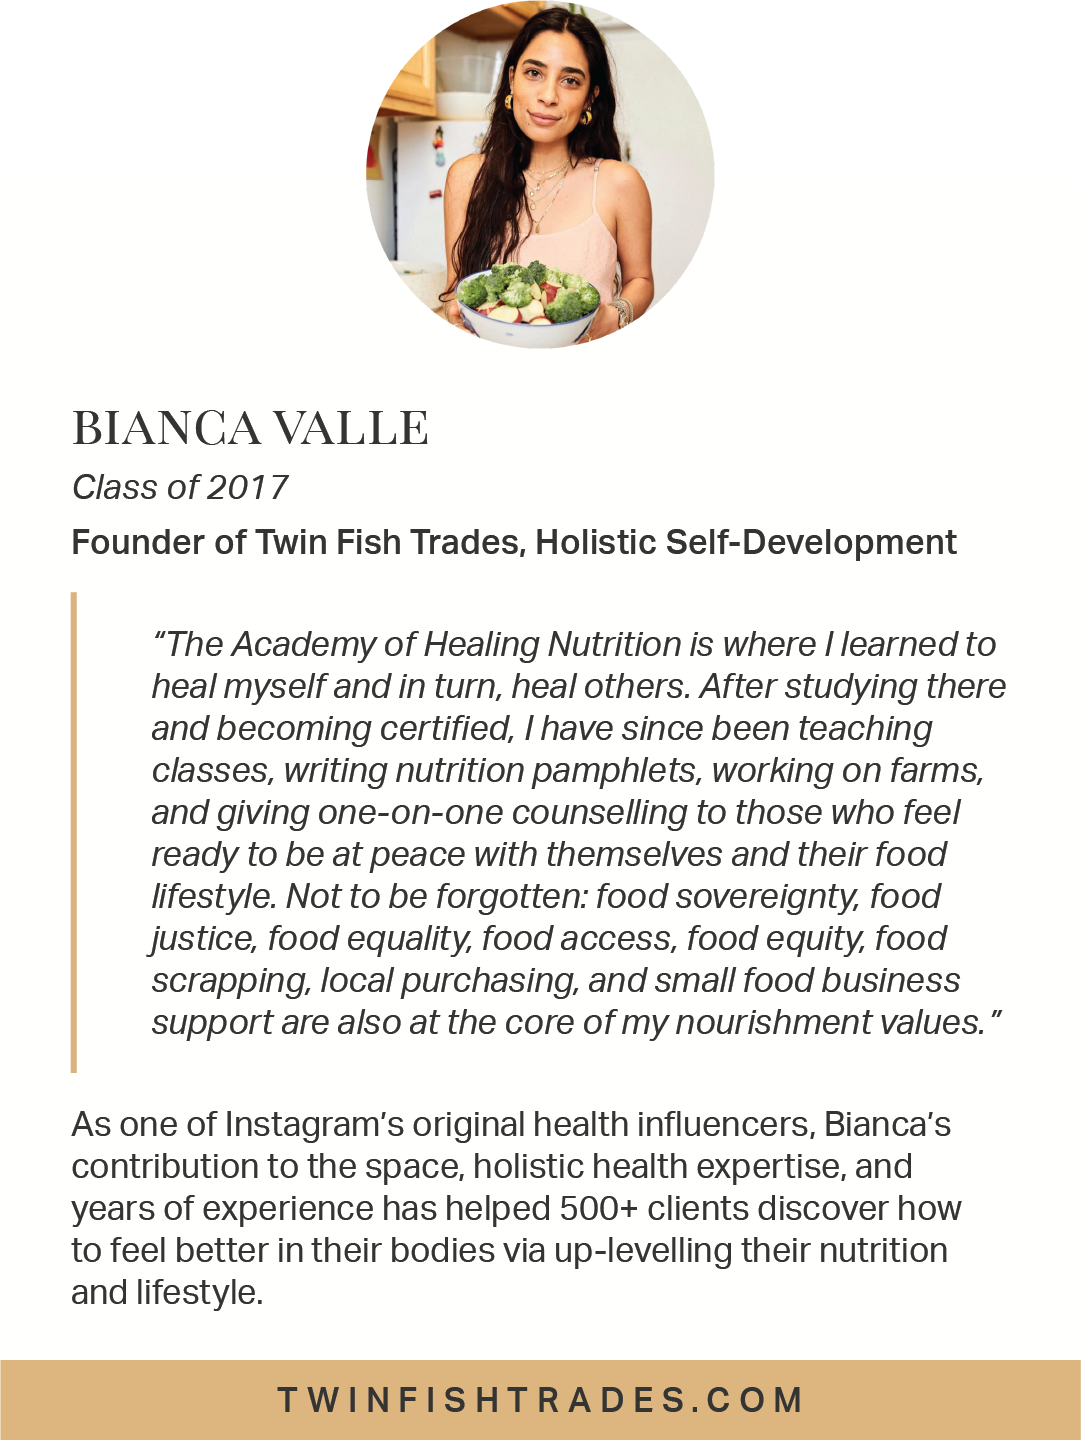  As one of Instagram’s original health influencers, Bianca’s contribution to the space, holistic health expertise, and years of experience has helped clients discover how to feel better in their bodies via up-levelling their nutrition and lifestyle. 